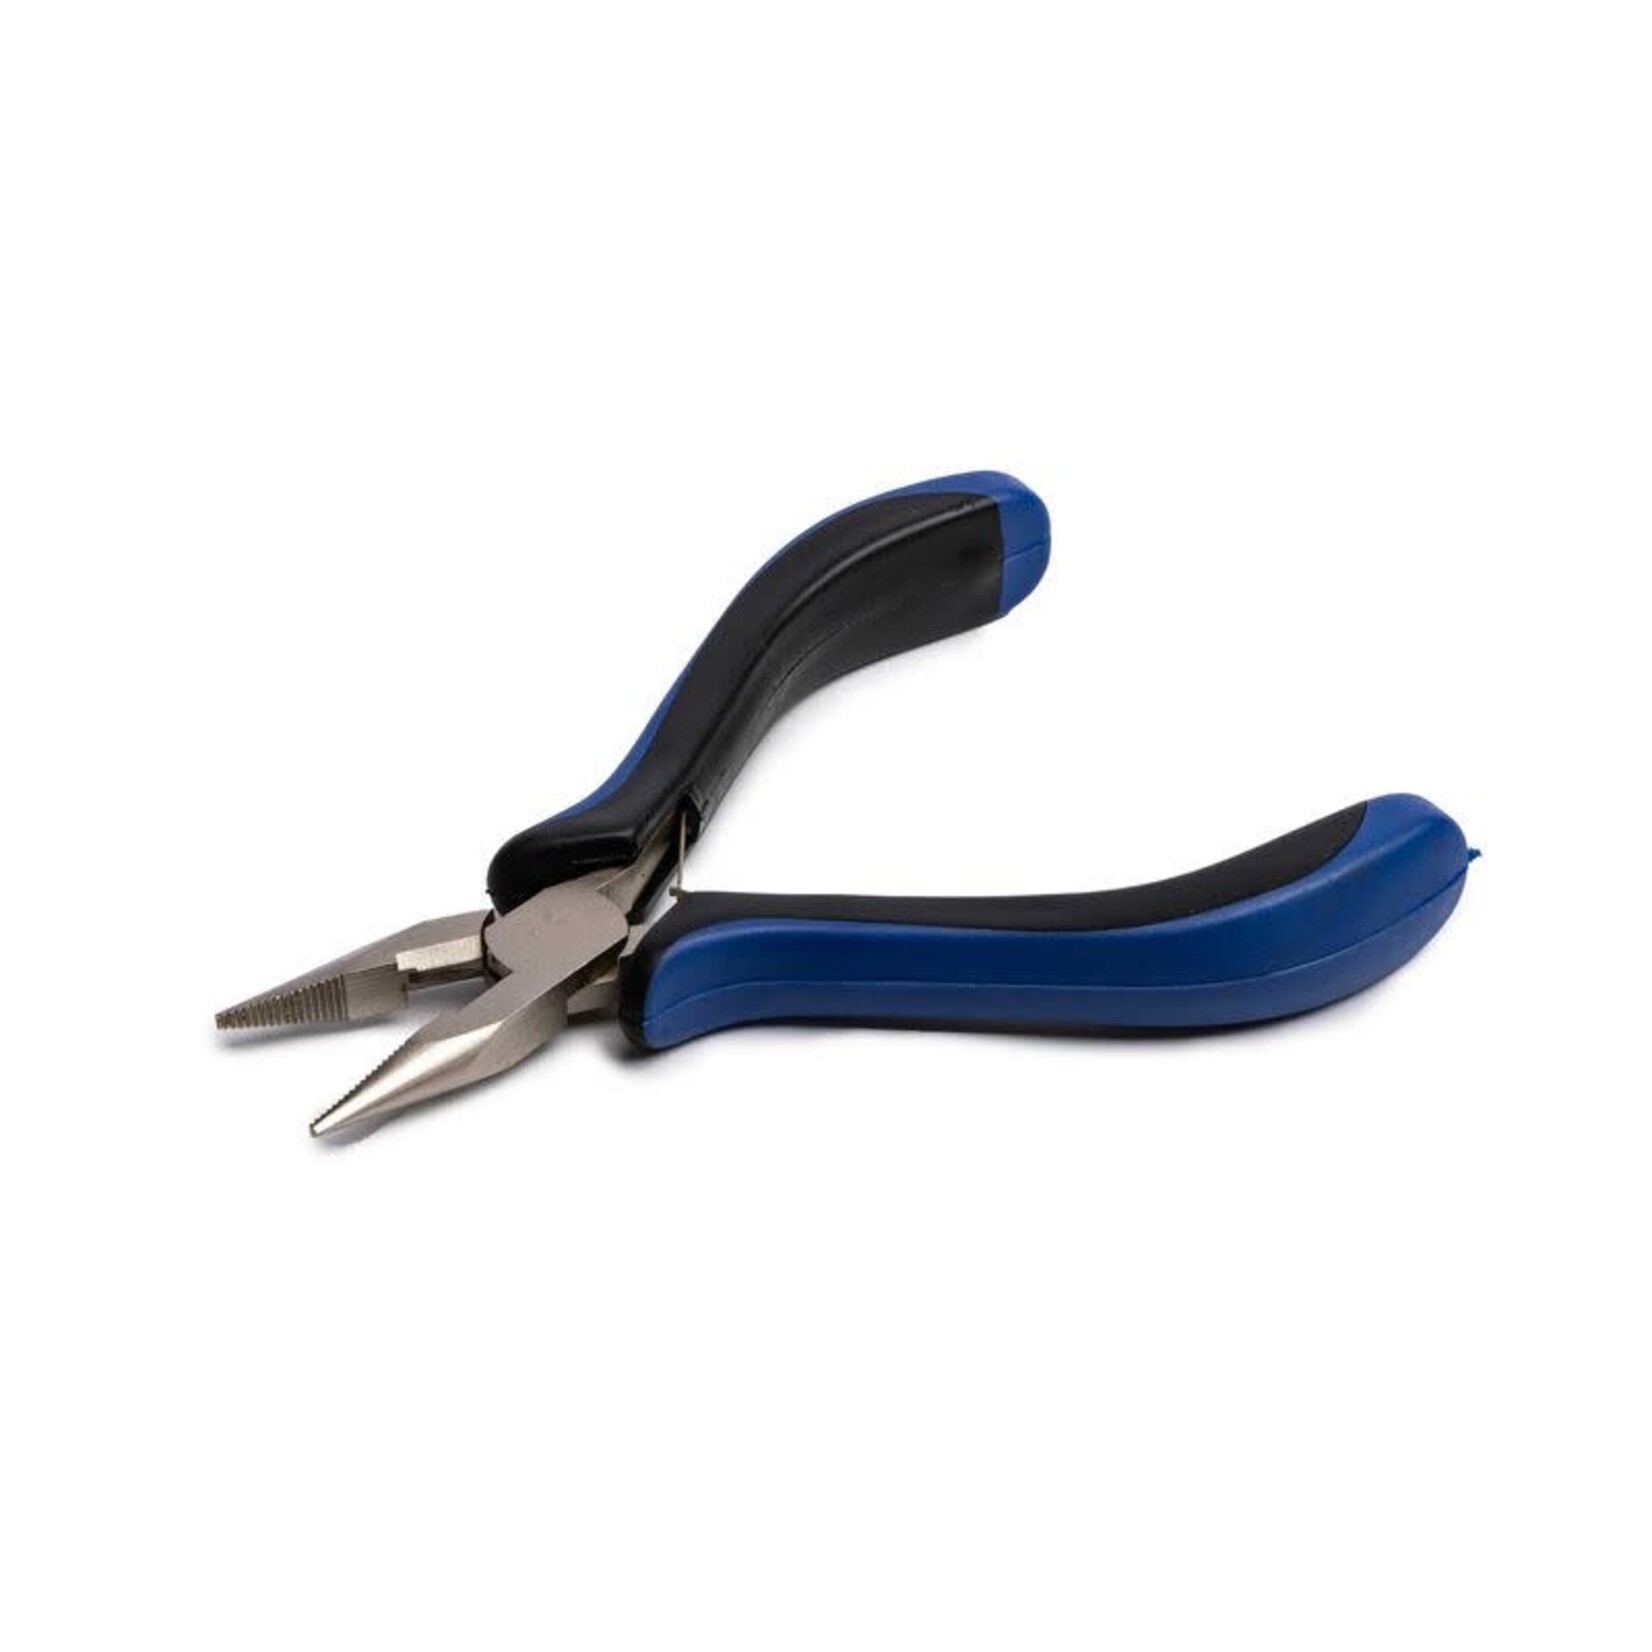 Hobby Essentials HDXK0139 Hobby Essentials PLIERS SPRING NEEDLE NOSE SIDE CUT